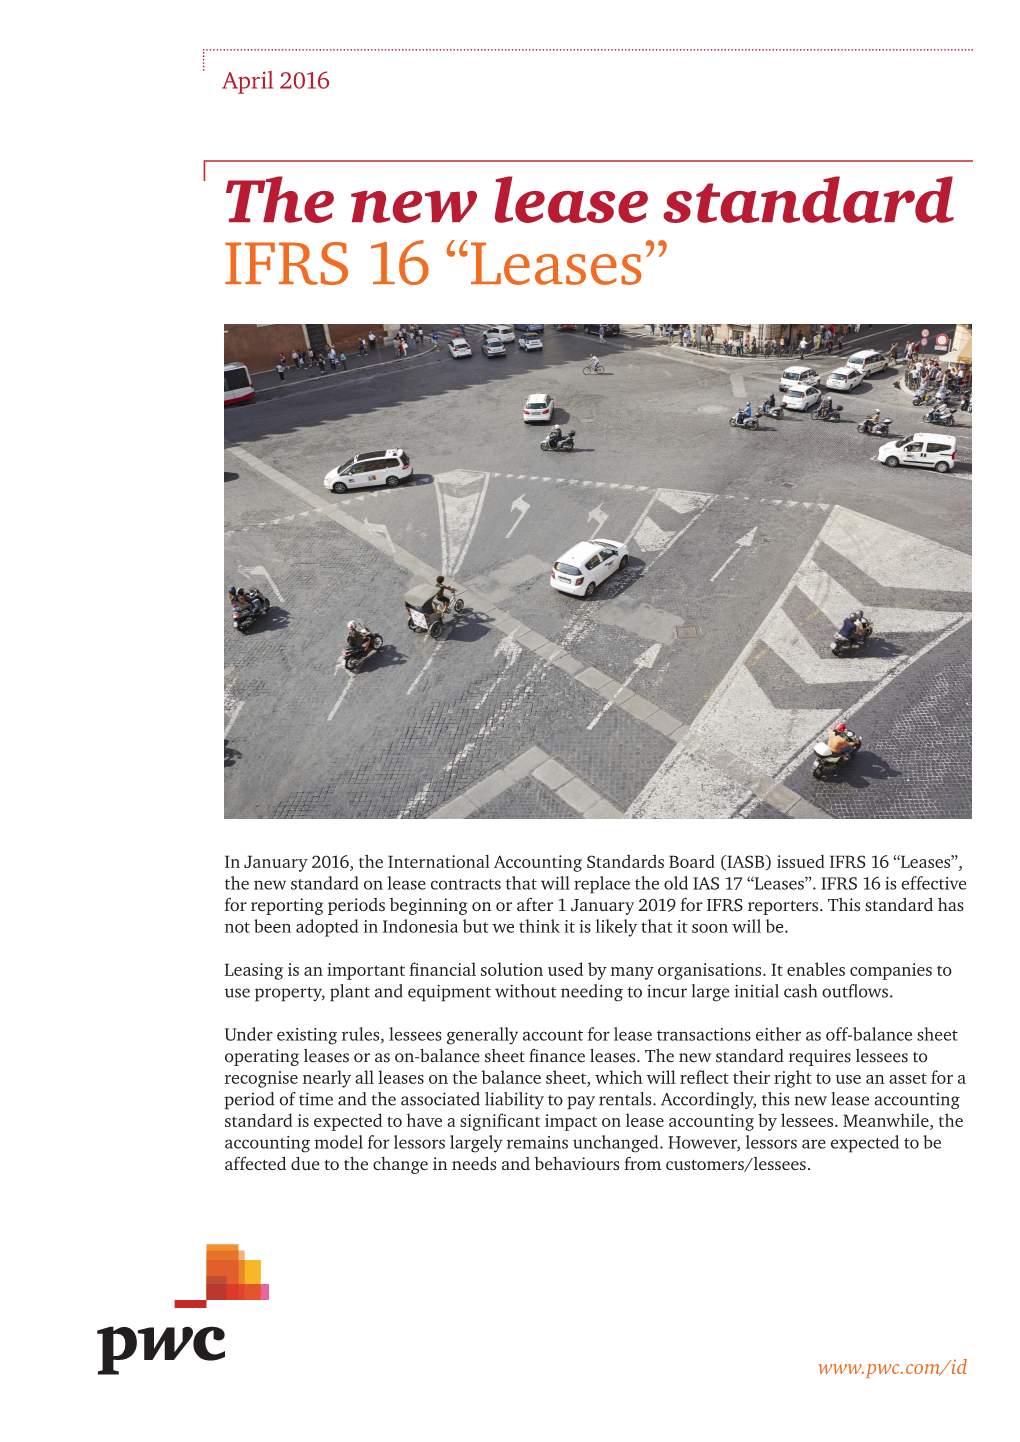 IFRS 16 “Leases”